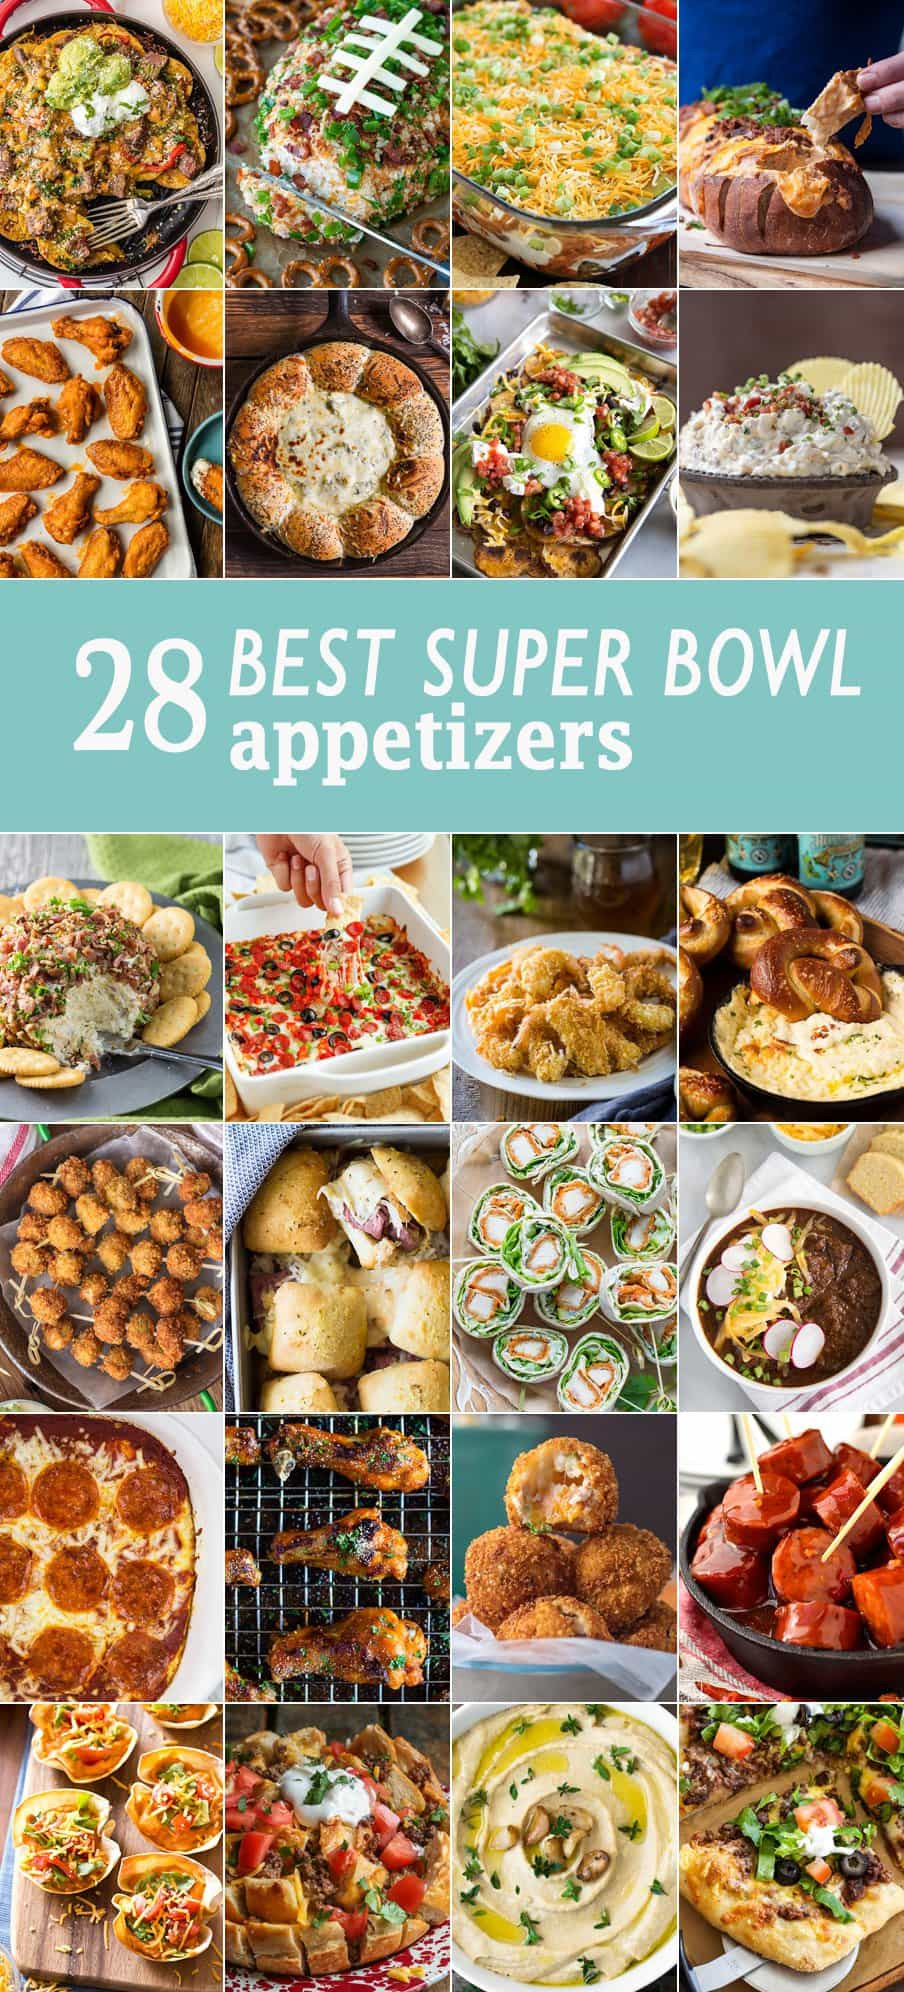 Super Bowl Party Appetizer Recipes
 10 Best Super Bowl Appetizers The Cookie Rookie